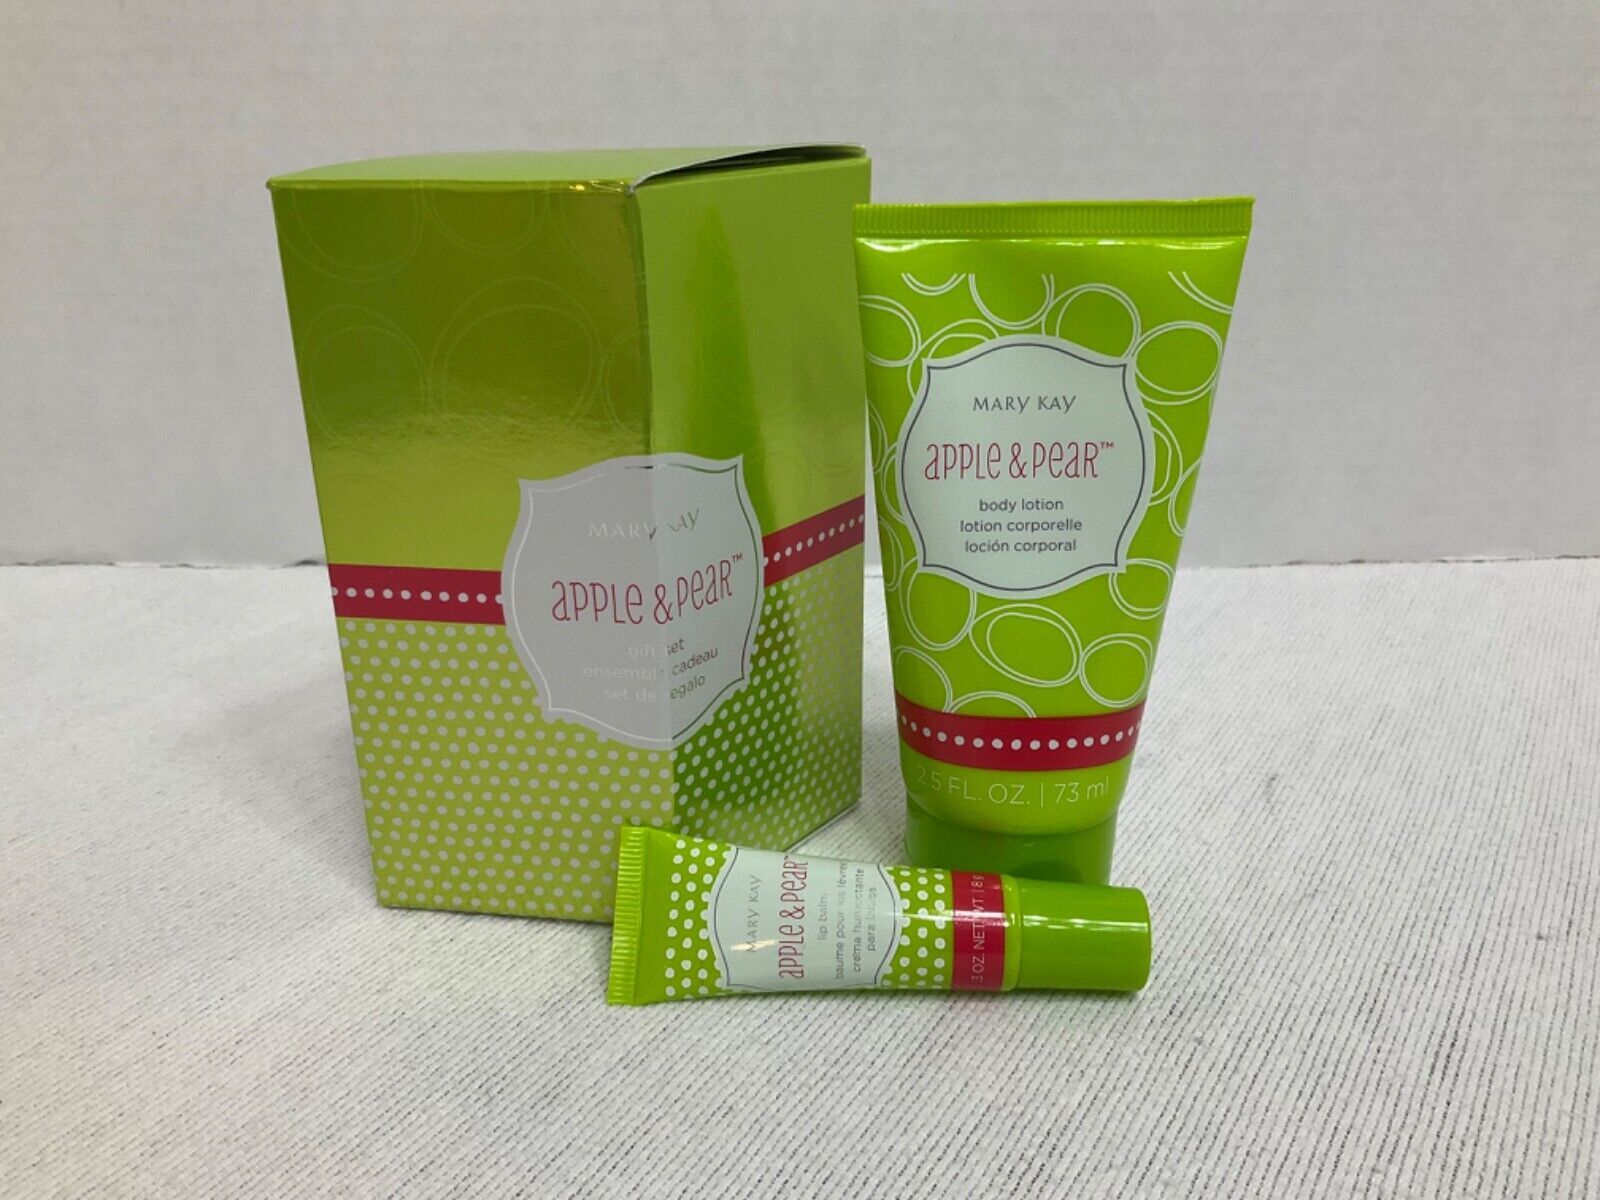 Mary Kay Apple & Pear Body Lotion & Lip Balm Gift Set Limited Edition New  - $13.83